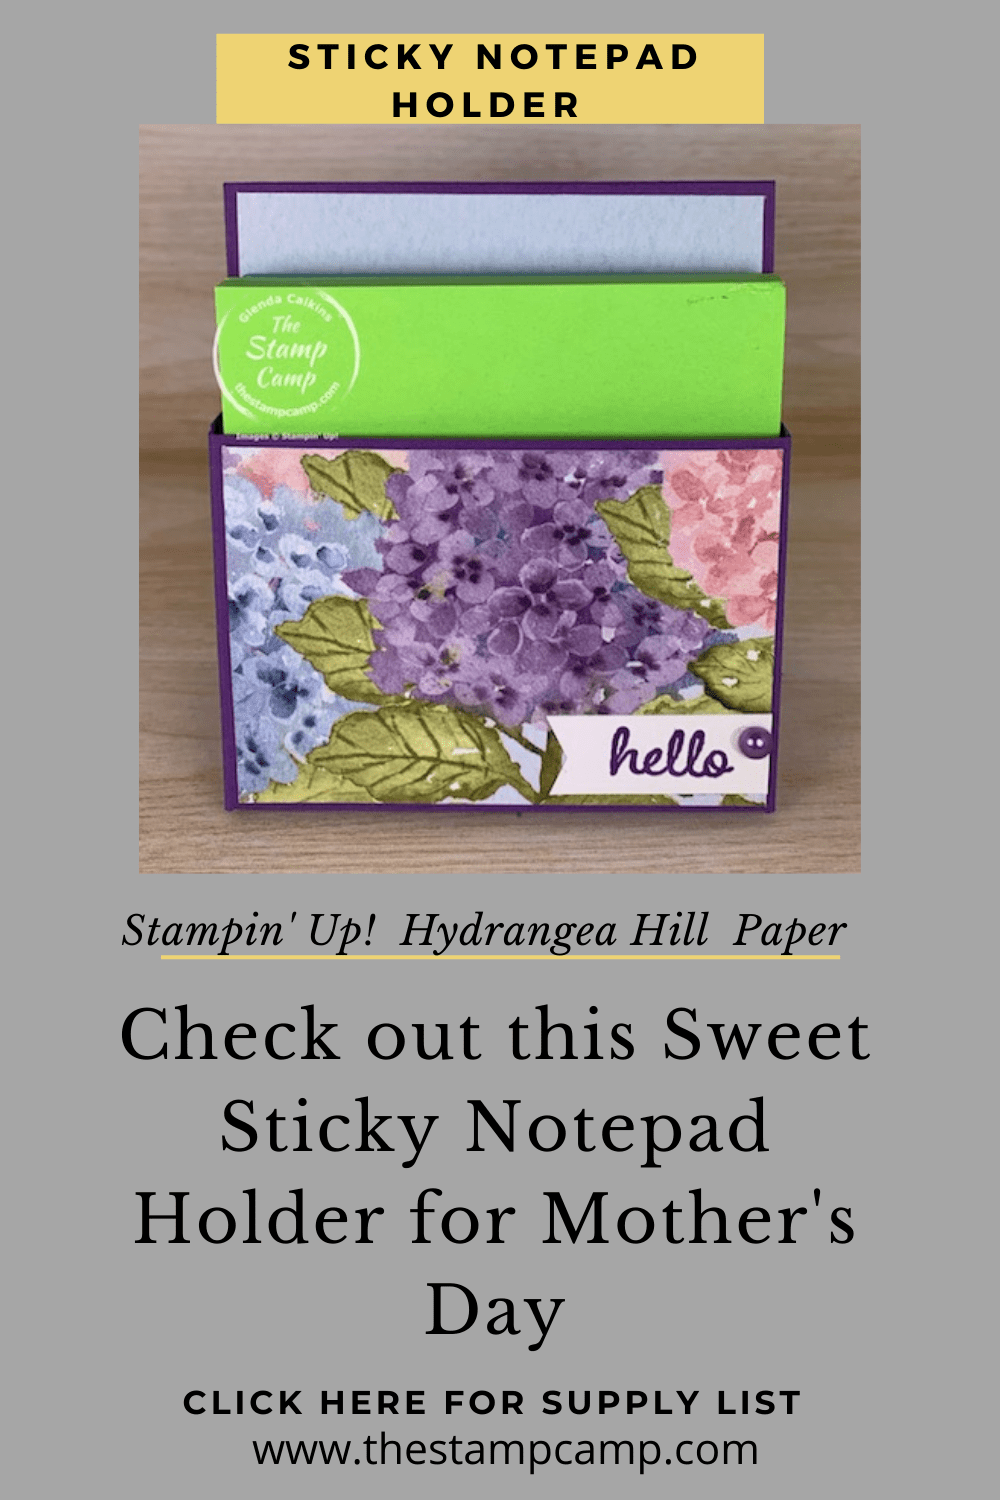 Need a sweet and simple gift to give someone? Try this beautiful Sticky Notepad Holder for a desk, mantel, counter etc. #thestampcamp #stampinup #notepadholder